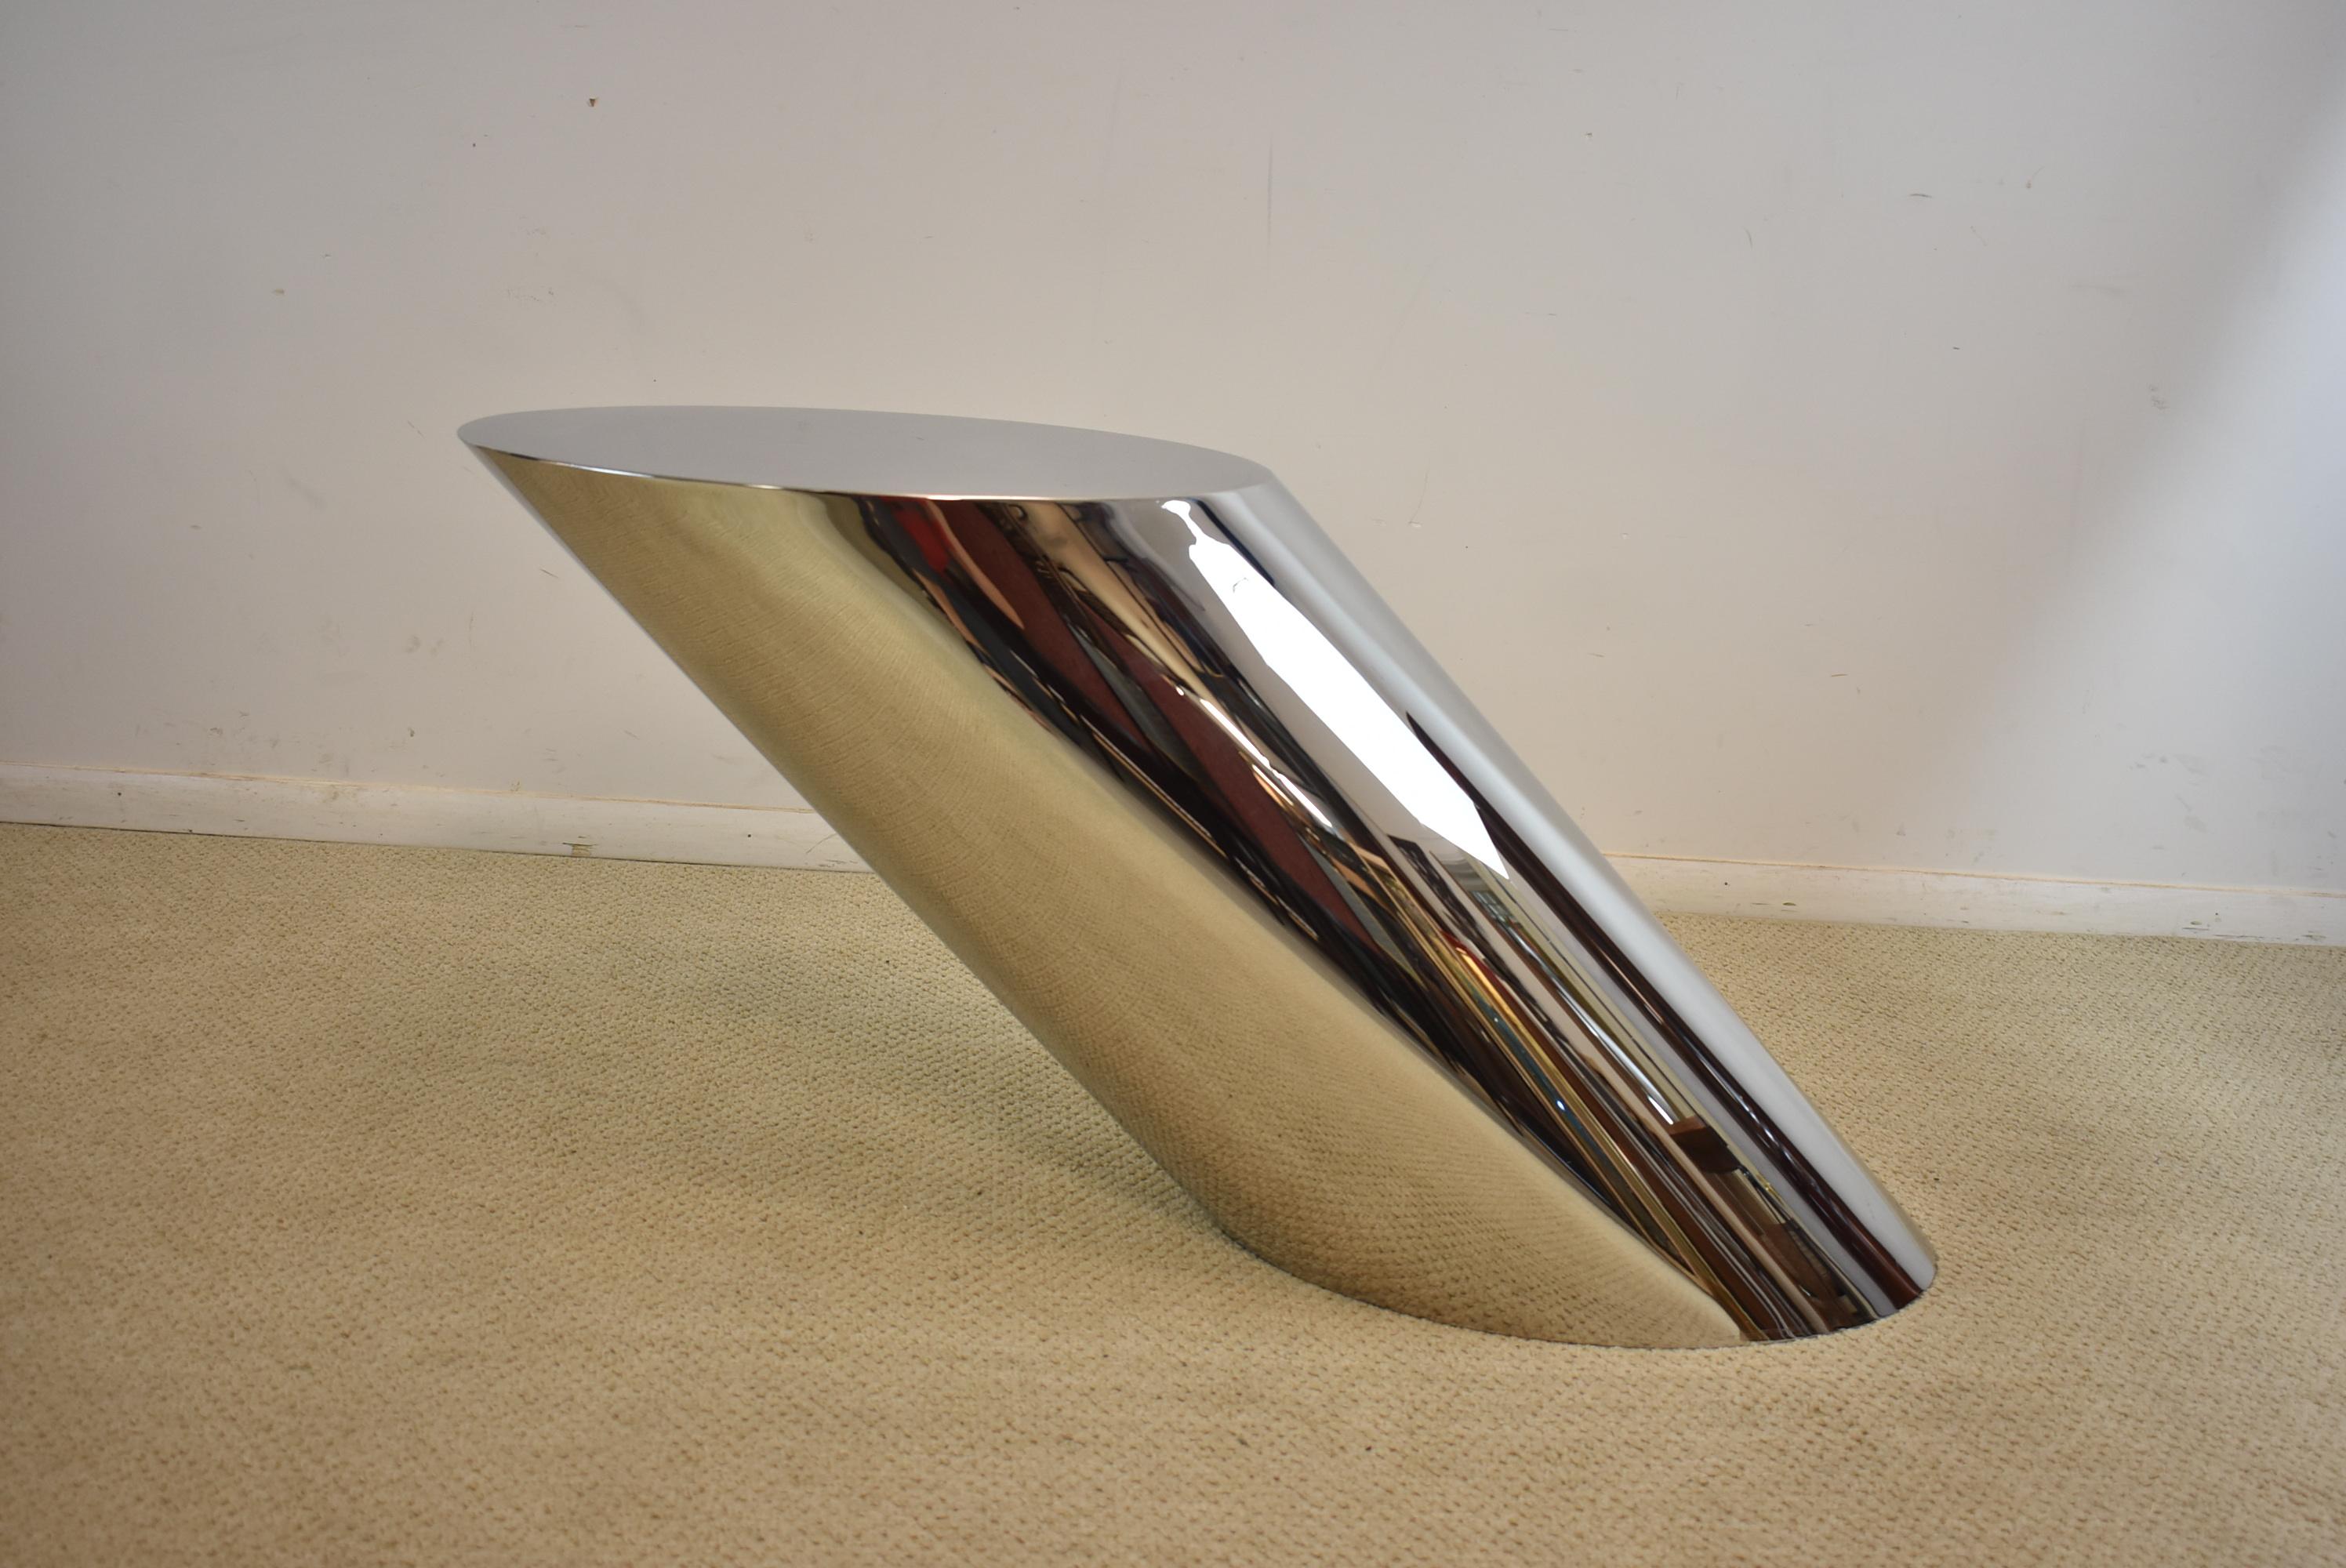 Mid-Century Modern chrome oval slant base side table. #01571, Springfield N.Y. Lable on back but name is worn off. Small dent near bottom as shown in photo. The oval top measures 15